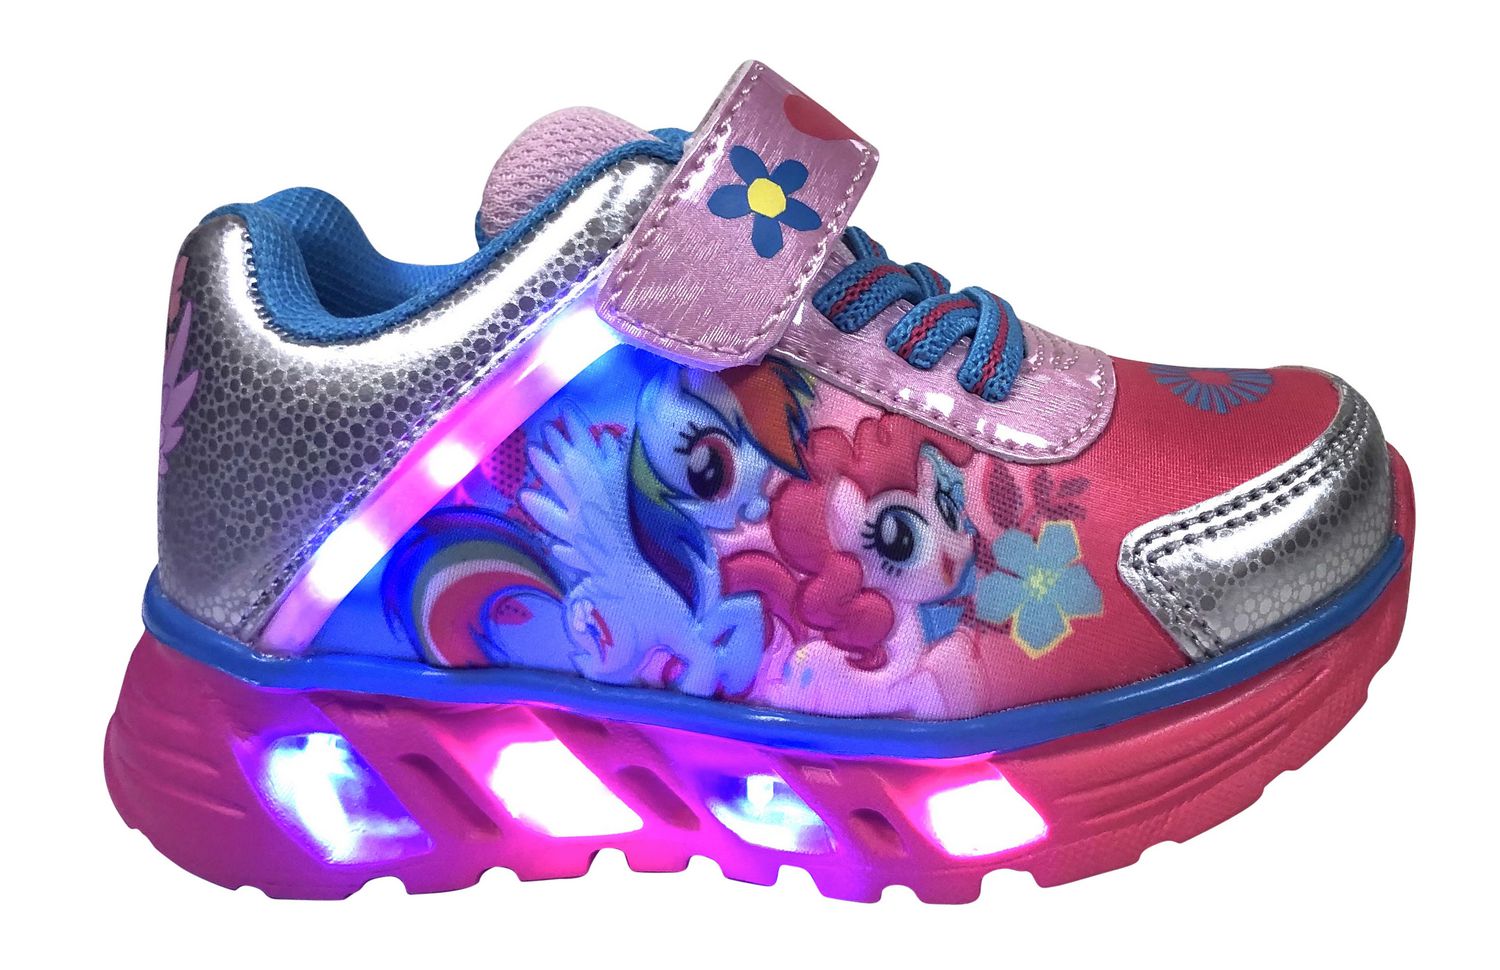 My Little Pony Lighted Toddler Girls' Athletic Shoes